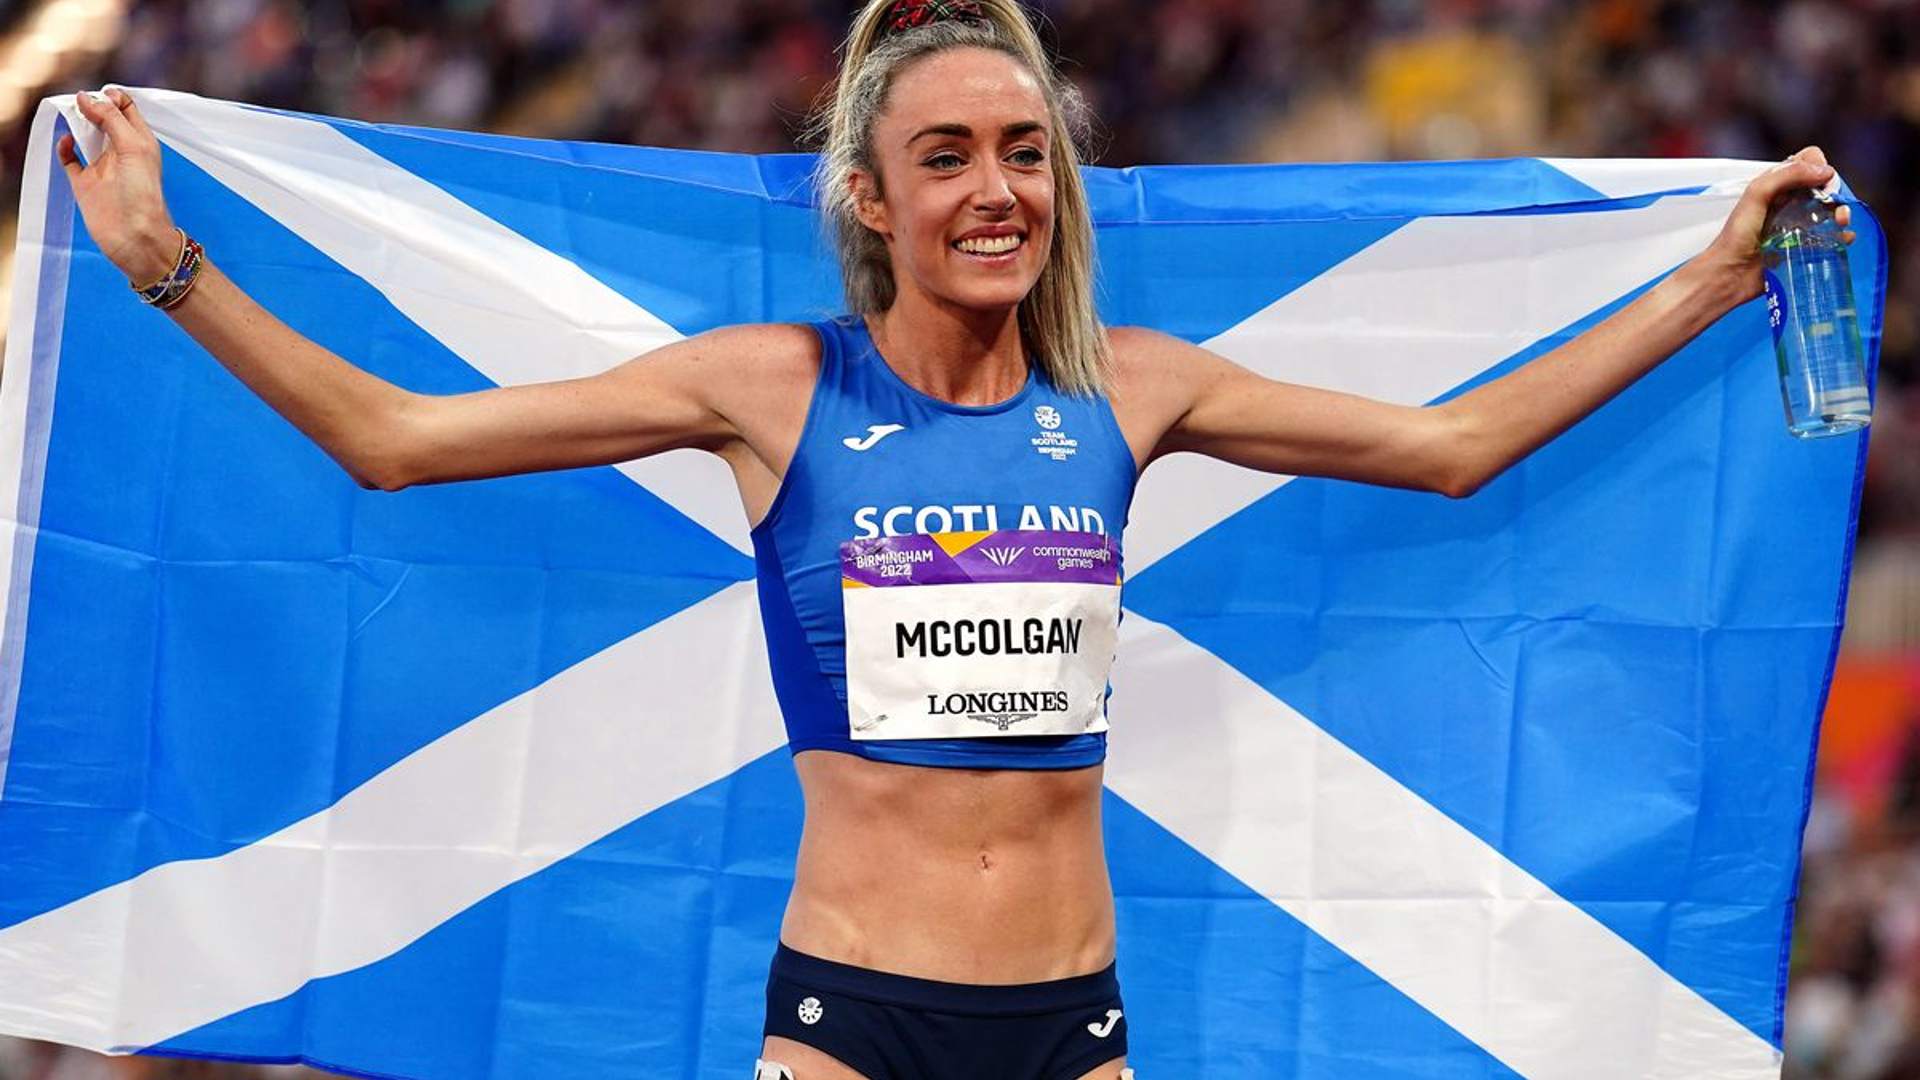 Eilish McColgan after winning her first major title at Commonwealth Games 2022 (Image Credits - Scottish Athletics)